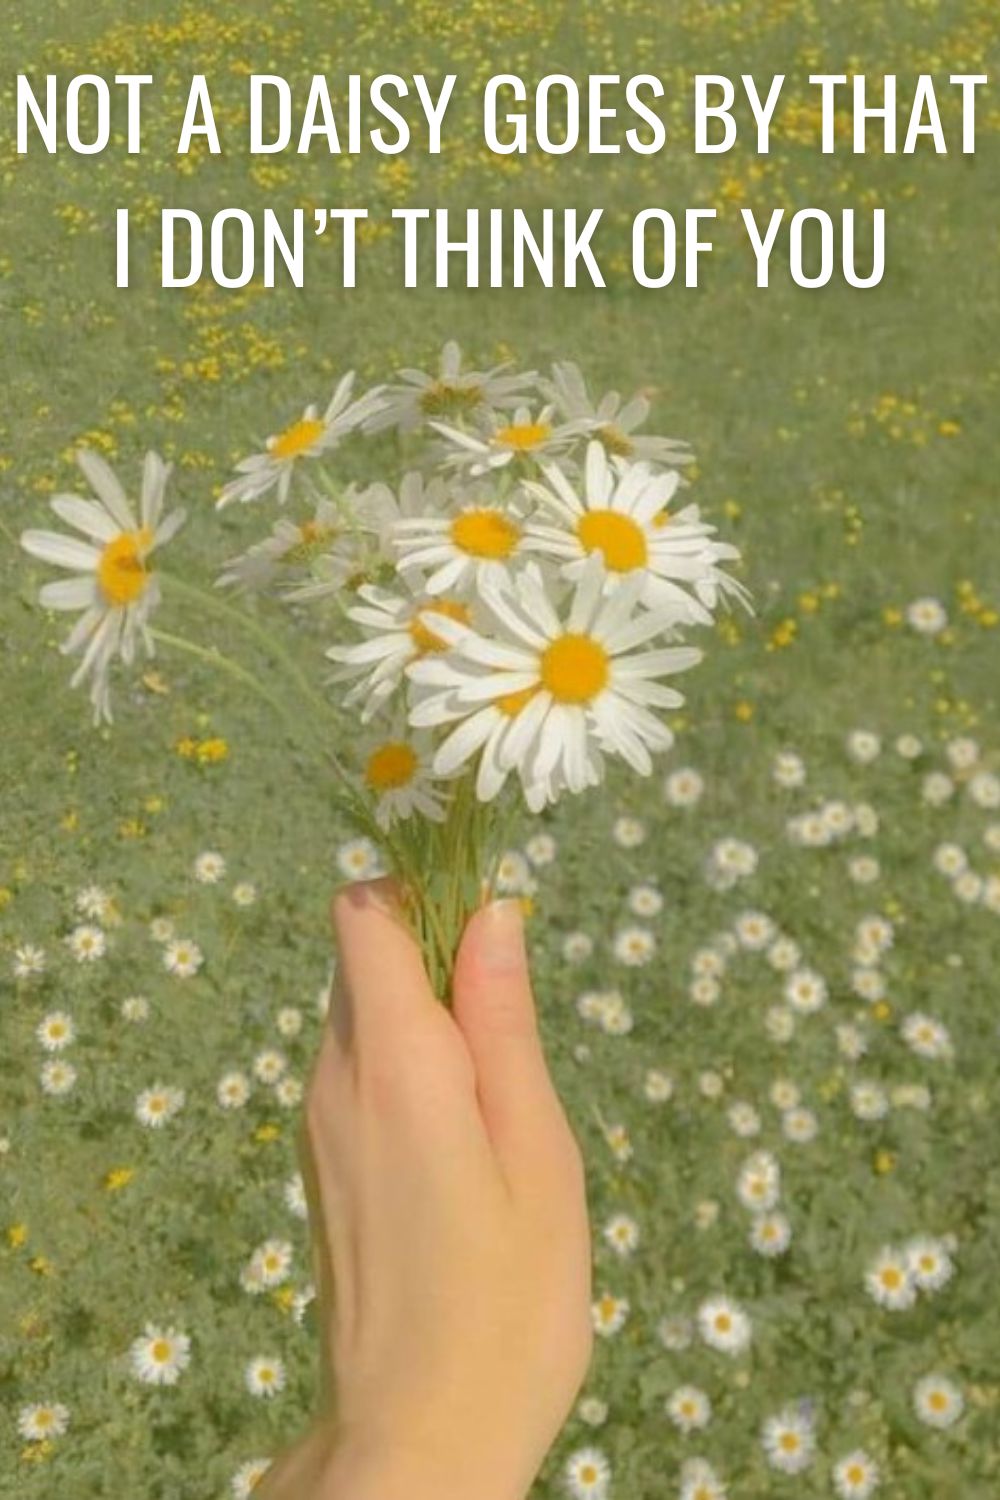 Quote: Not a daisy goes by that I don’t think of you - background of a white daisies bouquet.